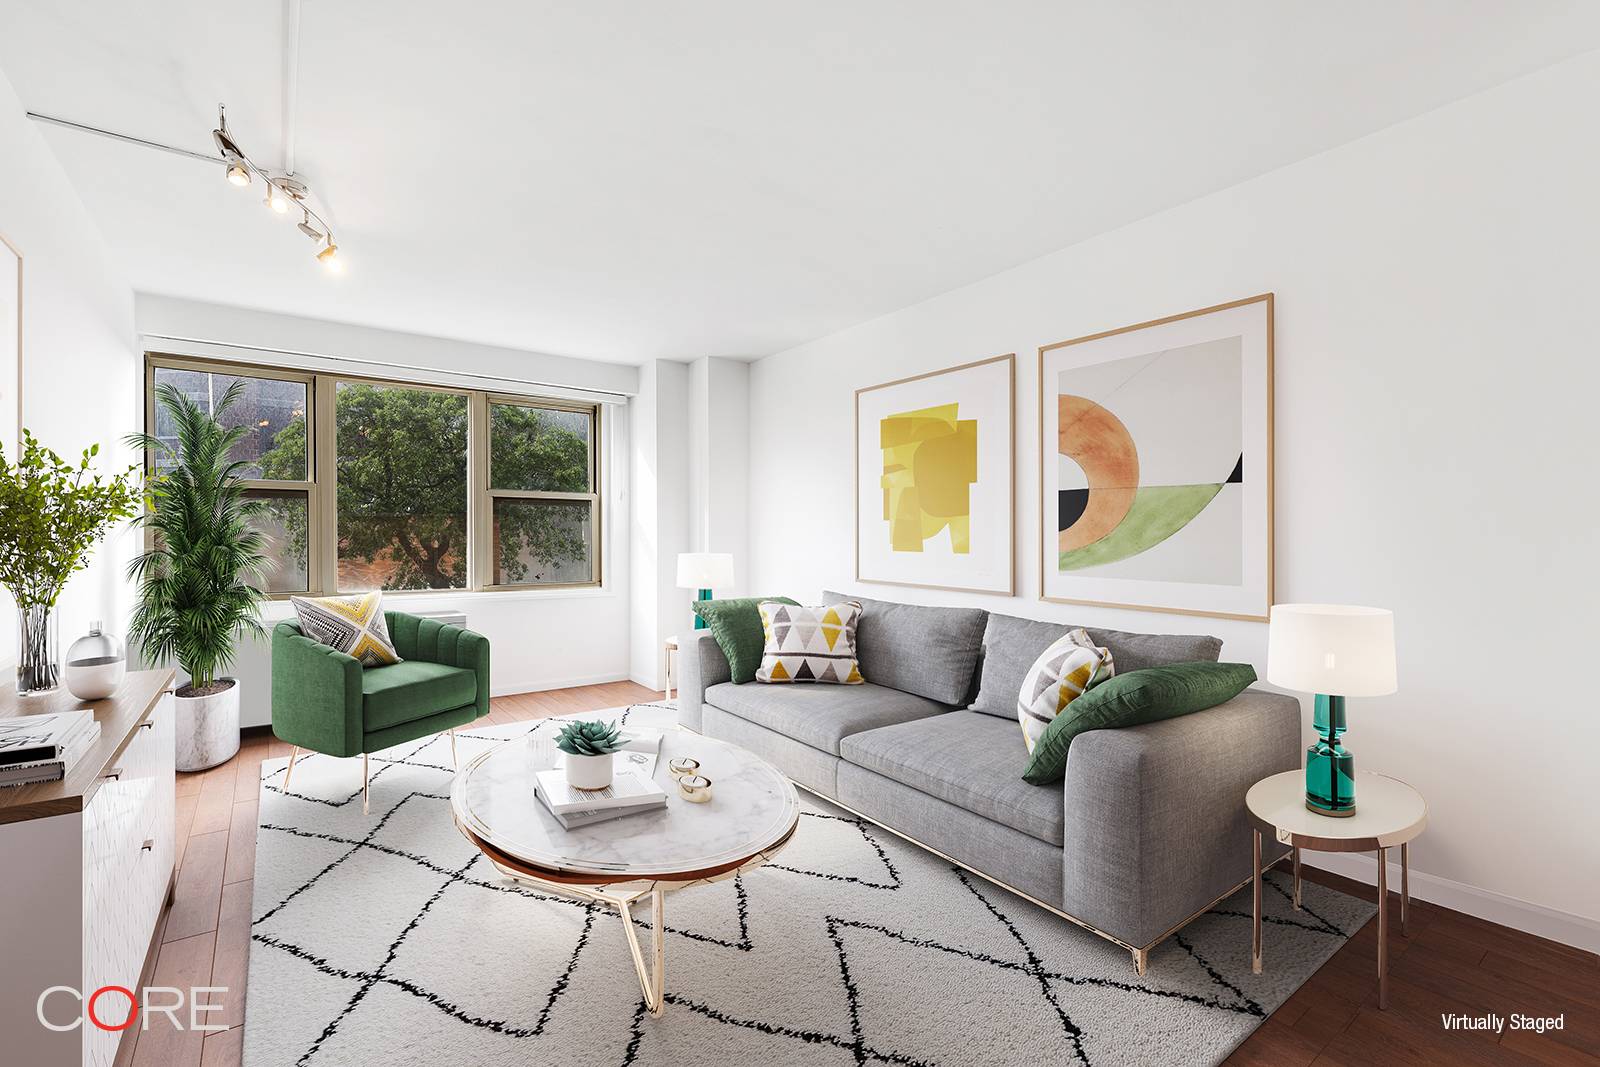 This newly renovated one bedroom home offers the perfect combination of warmth and elegance with its modern interior and abundance of south facing sunlight.